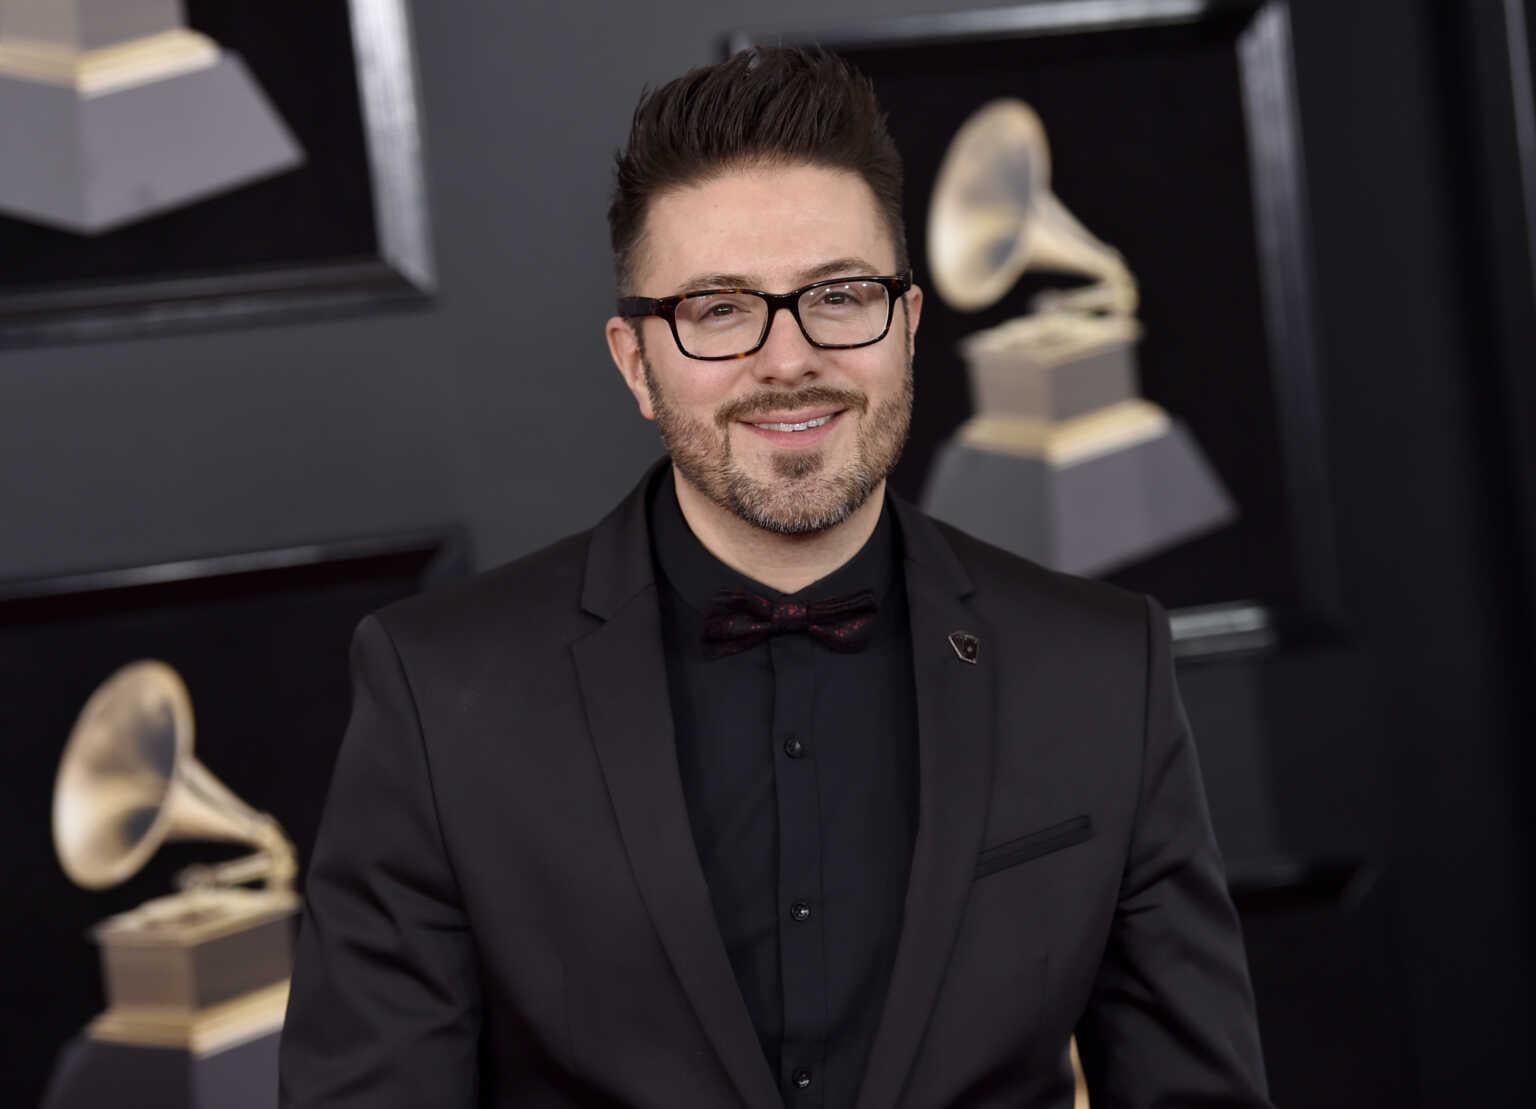 Danny Gokey - New Day (Official Music Video) 